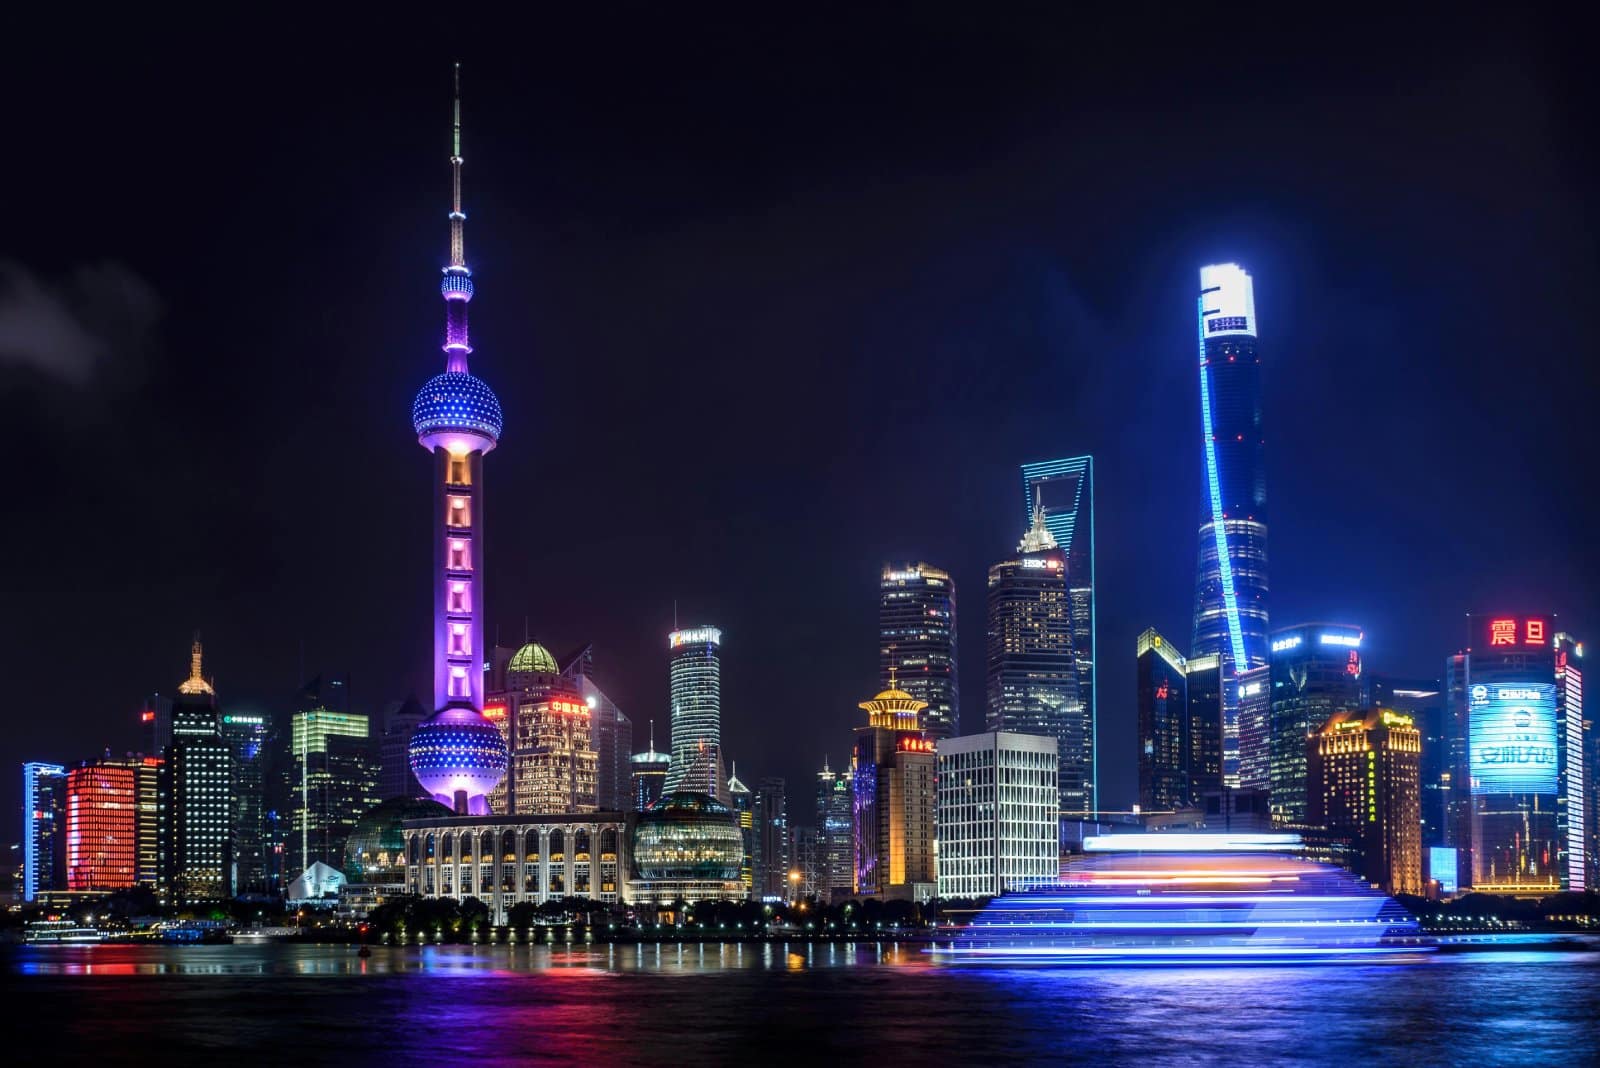 <p class="wp-caption-text">Image Credit: Pexels / Wolfram K</p>  <p><span>Shanghai, China’s futuristic metropolis, is a city that never seems to sleep. The iconic Bund waterfront contrasts the colonial-era buildings and the modern skyscrapers across the Huangpu River. Shanghai’s status as a global financial hub is evident in its towering skyline, yet the city’s traditional Chinese gardens, such as the tranquil Yu Garden, provide a peaceful escape from the urban rush.</span></p> <p><span>The Shanghai Museum offers a deep dive into China’s artistic heritage, while the city’s burgeoning contemporary art scene can be explored in the galleries of the M50 art district.</span></p> <p><span>Culinary explorers will find Shanghai’s food scene exhilarating, ranging from sumptuous dumplings at a street stall to innovative cuisine at upscale restaurants. The city’s fast-paced lifestyle and rich cultural tapestry make Shanghai an exhilarating destination for the urban explorer.</span></p> <p><b>Insider’s Tip:</b><span> Take a walk along the Bund at dawn to see the city’s skyline in the soft morning light, away from the crowds.</span></p> <p><b>When to Travel:</b><span> Spring (March to May) and autumn (October and November) offer mild weather.</span></p> <p><b>How to Get There:</b><span> Shanghai Pudong International Airport is the main international gateway, with the city’s public transport network providing easy access to key attractions.</span></p>